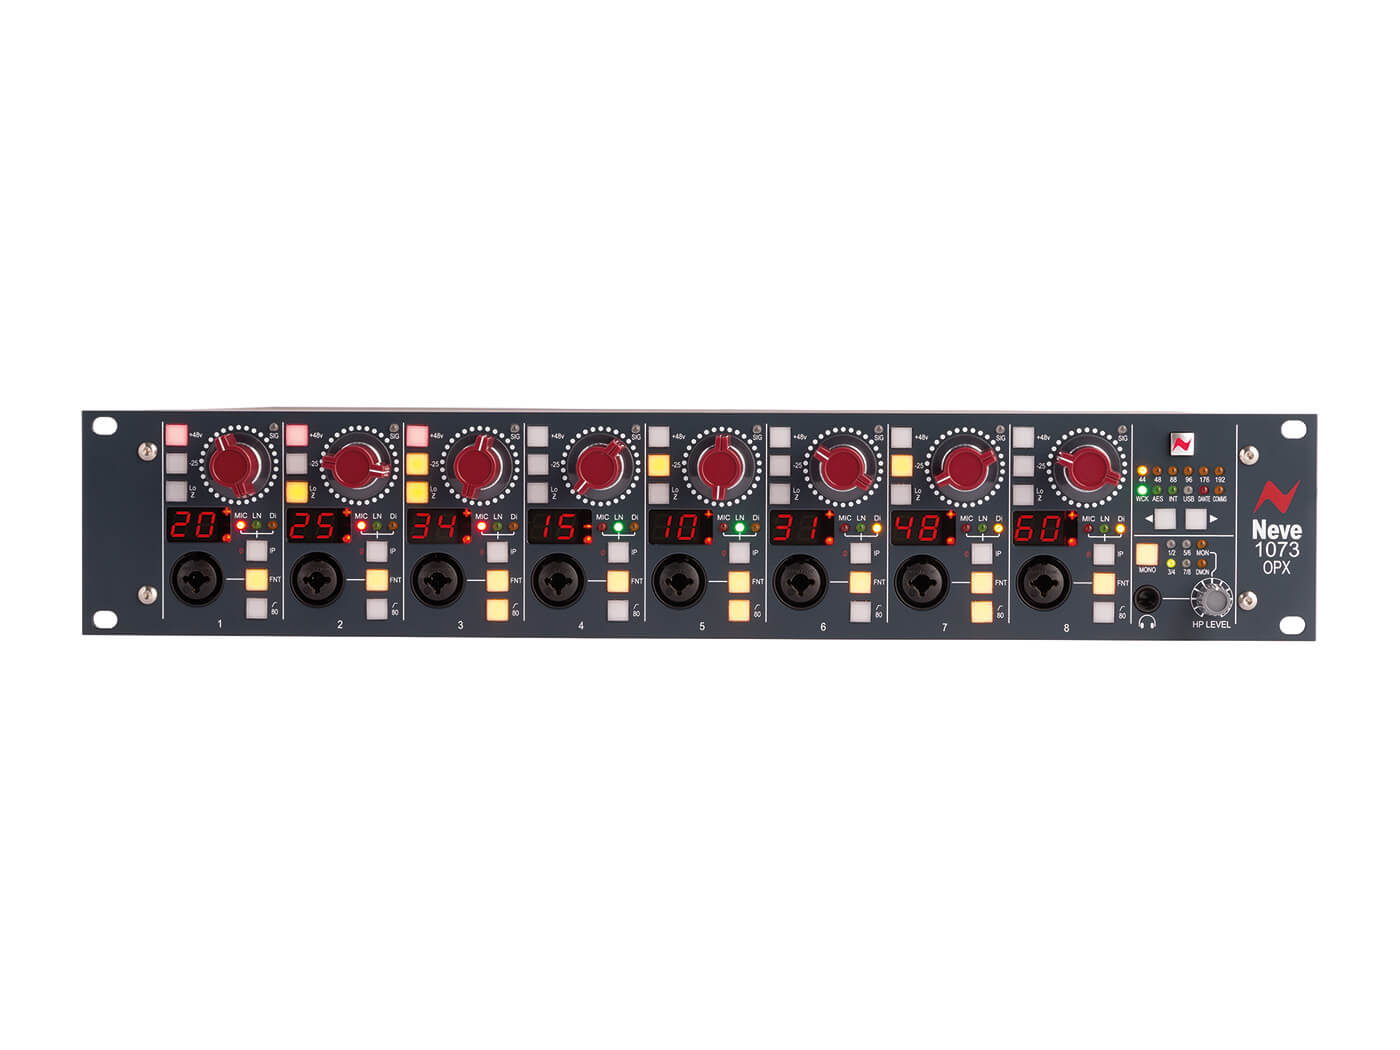 AMS Neve 1073 OPX Review